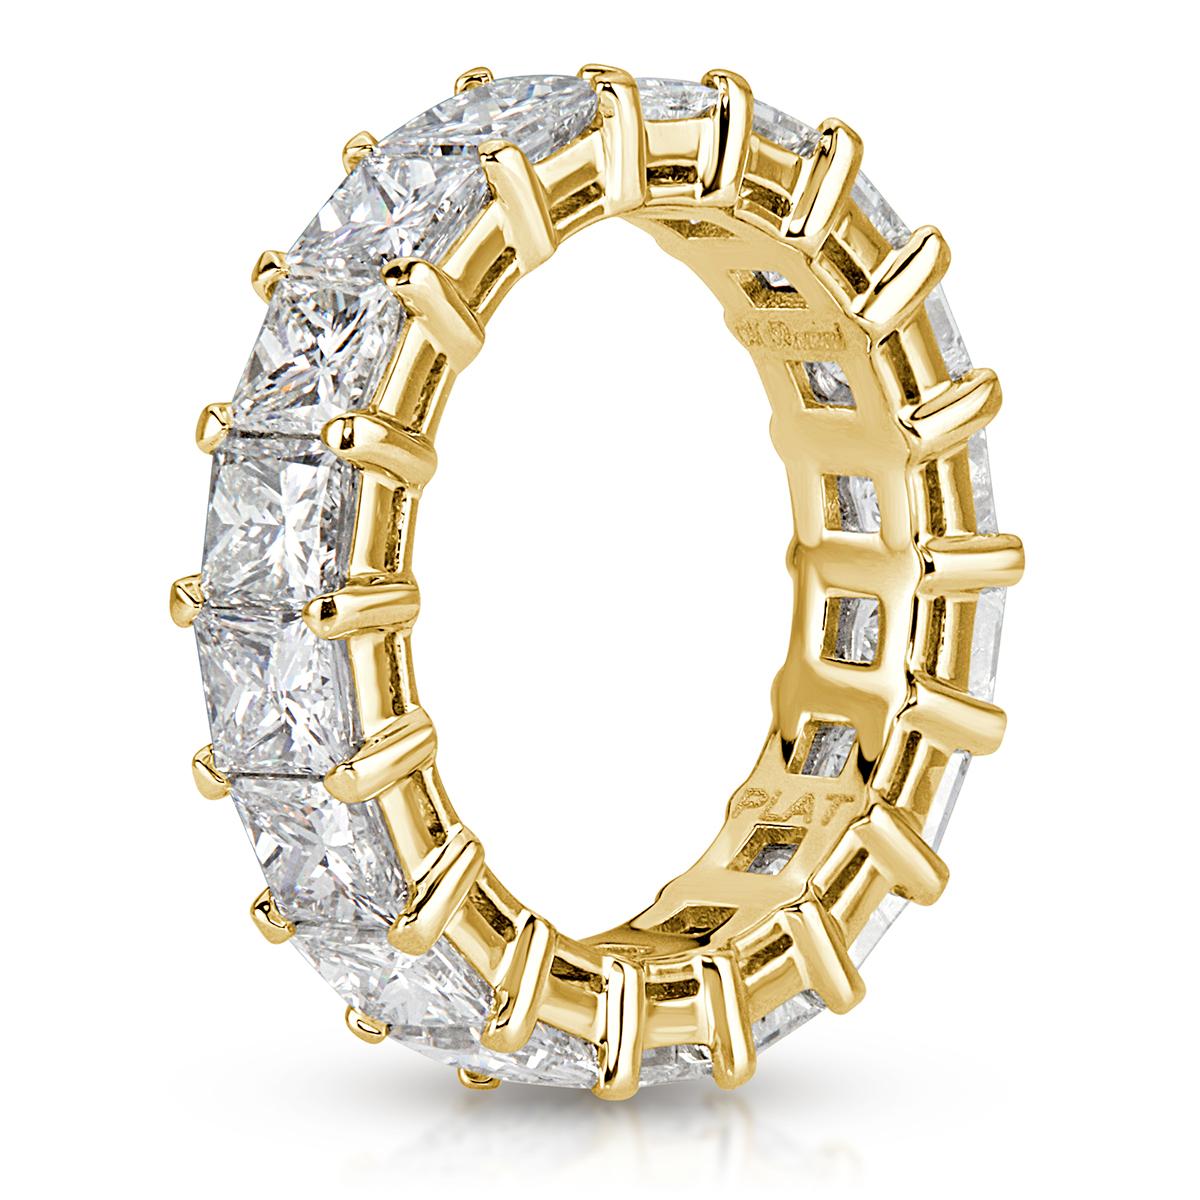 This ravishing diamond eternity band showcases 6.34ct of perfectly matched princess cut diamonds graded at F-G, VS1-VS2. The diamonds are hand set in 18k yellow gold. All eternity bands are shown in a size 6.5. We custom craft each eternity band and